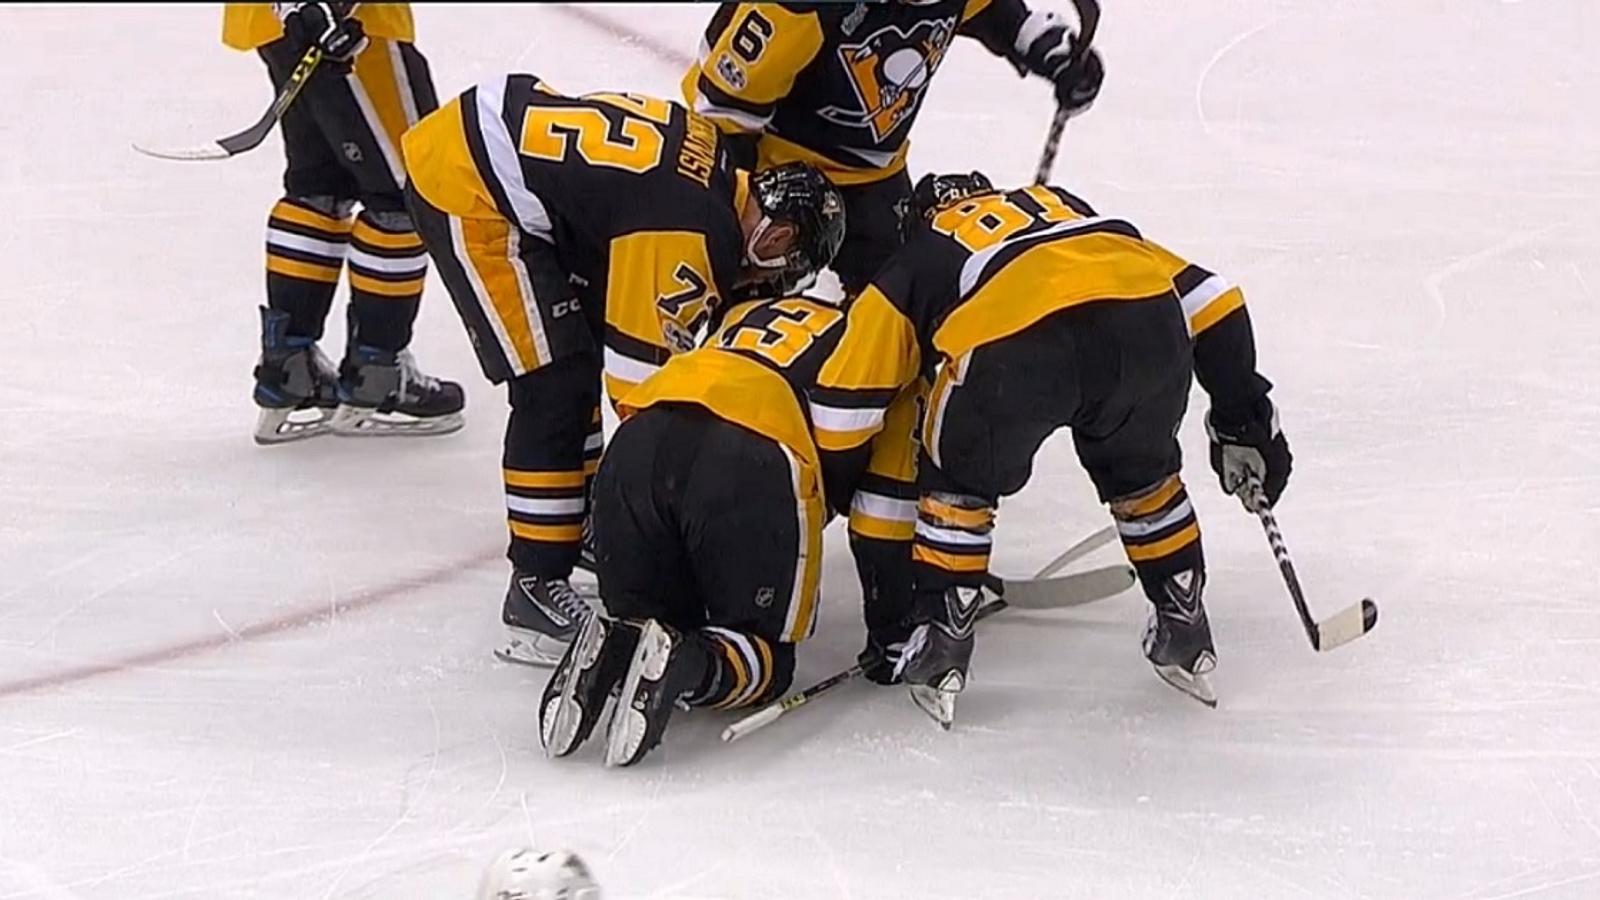 Breaking: Penguins forward can't stand after blocking huge shot from Subban.